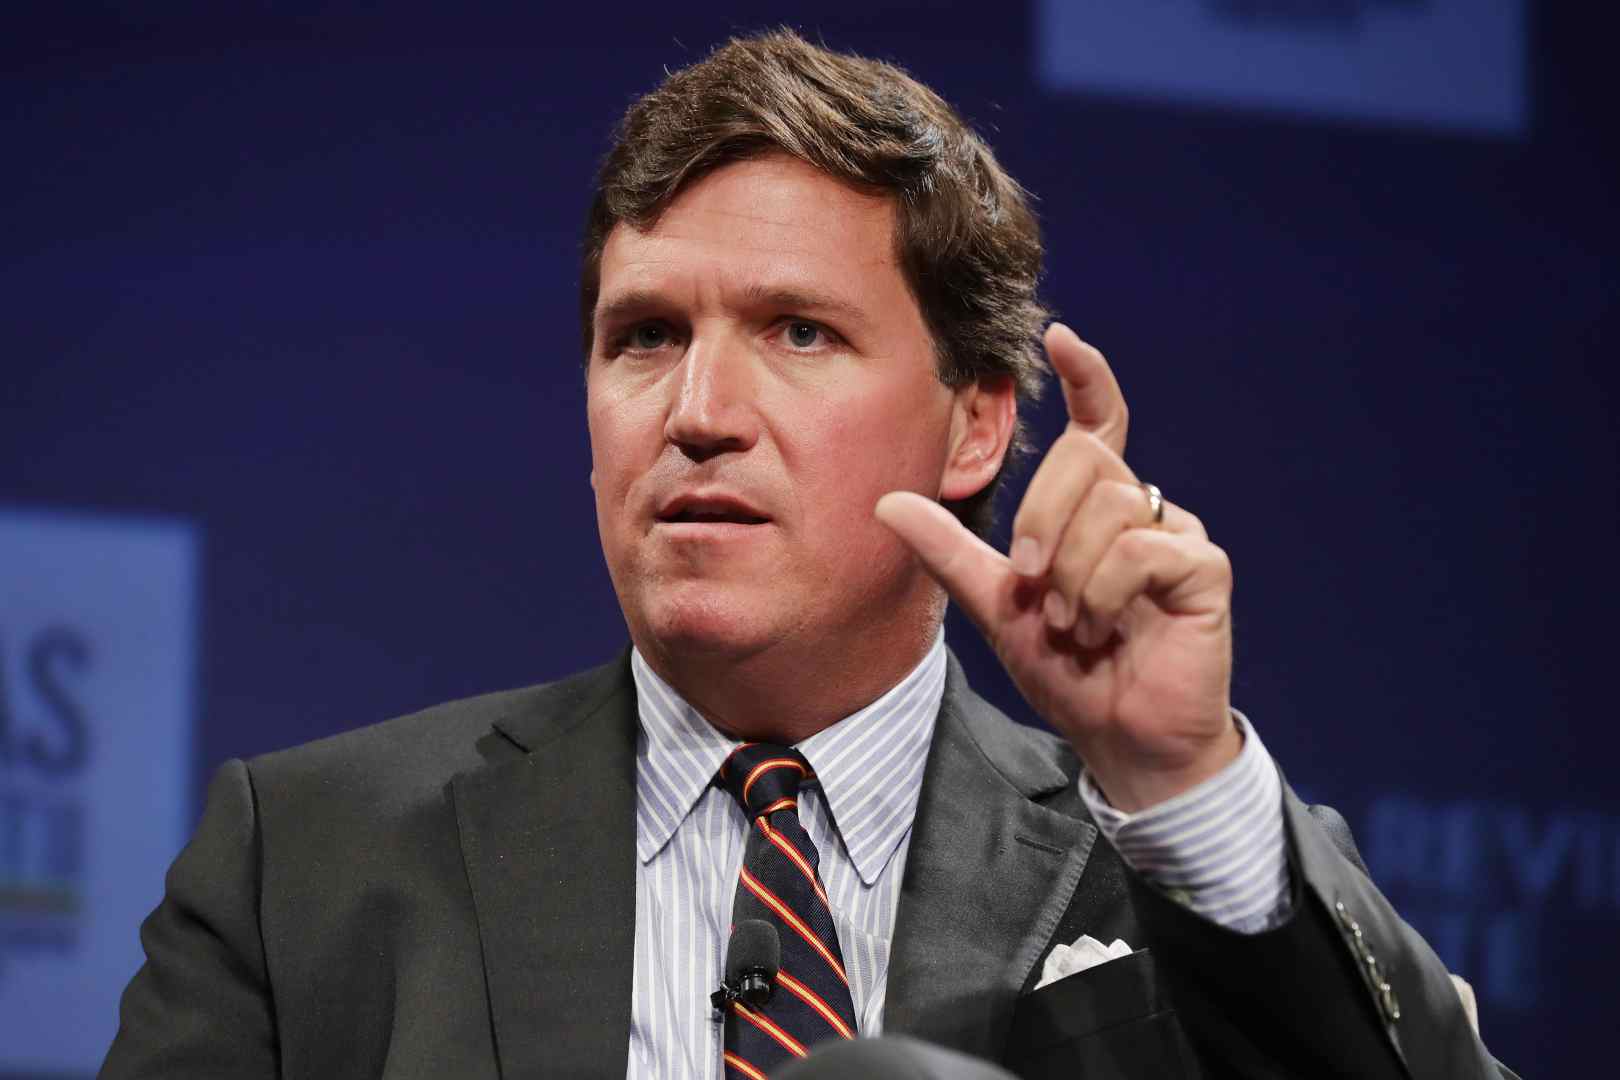 After Tucker Carlson was fired from Fox, there's plenty of speculation about where he'll go next, but most predict his viewers will follow.